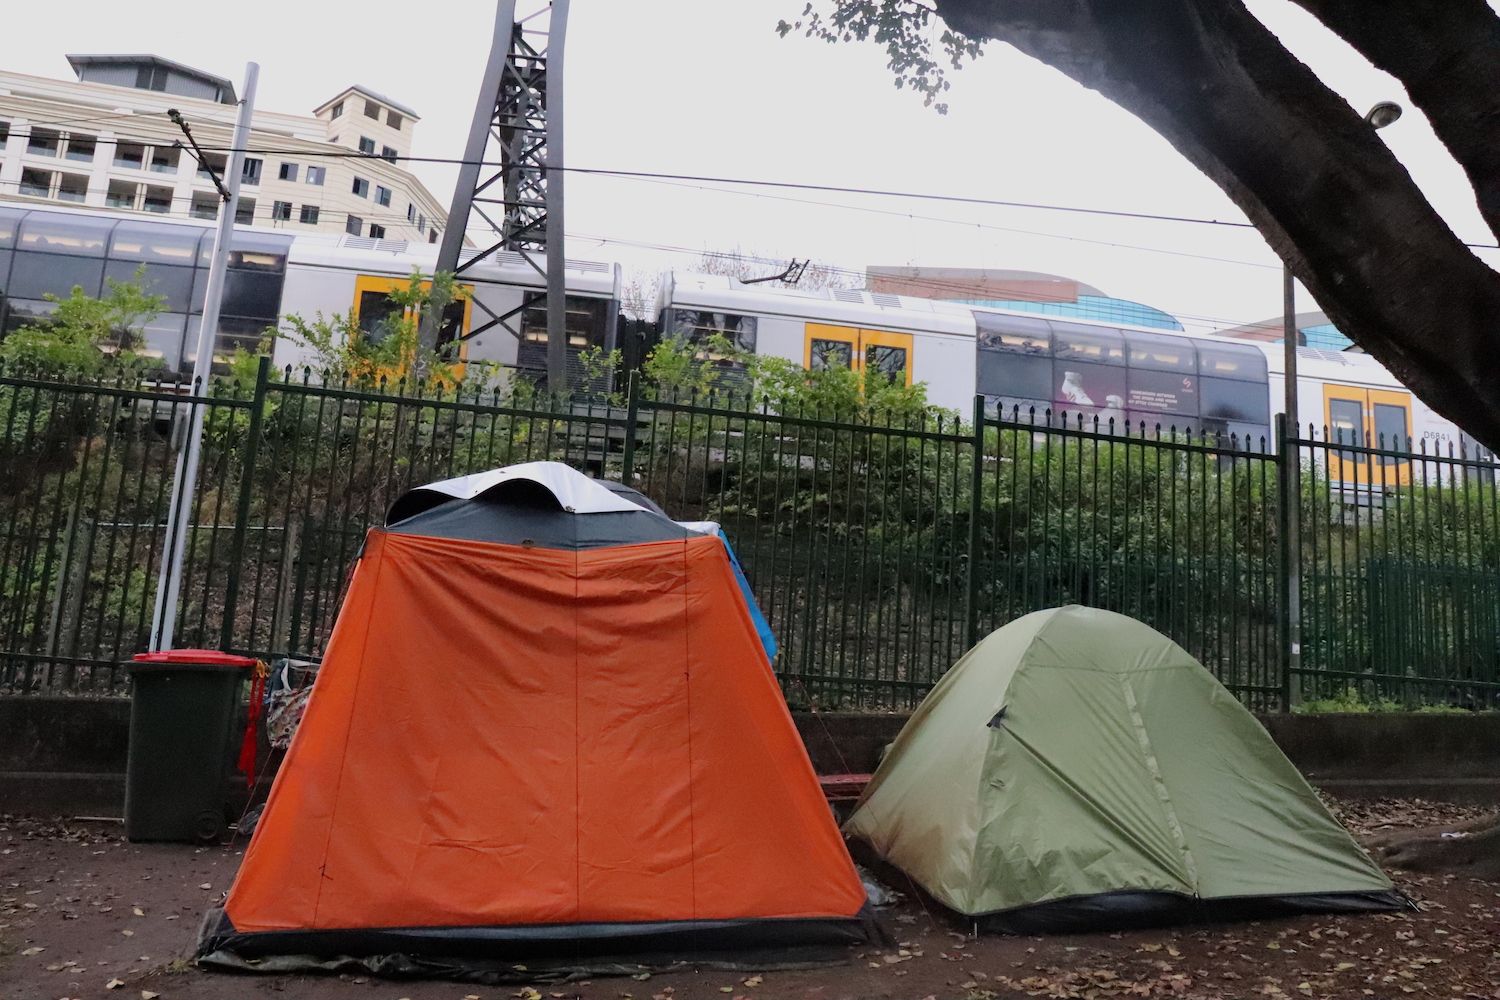 Pictured: Tents at Belmore Park, Sydney.